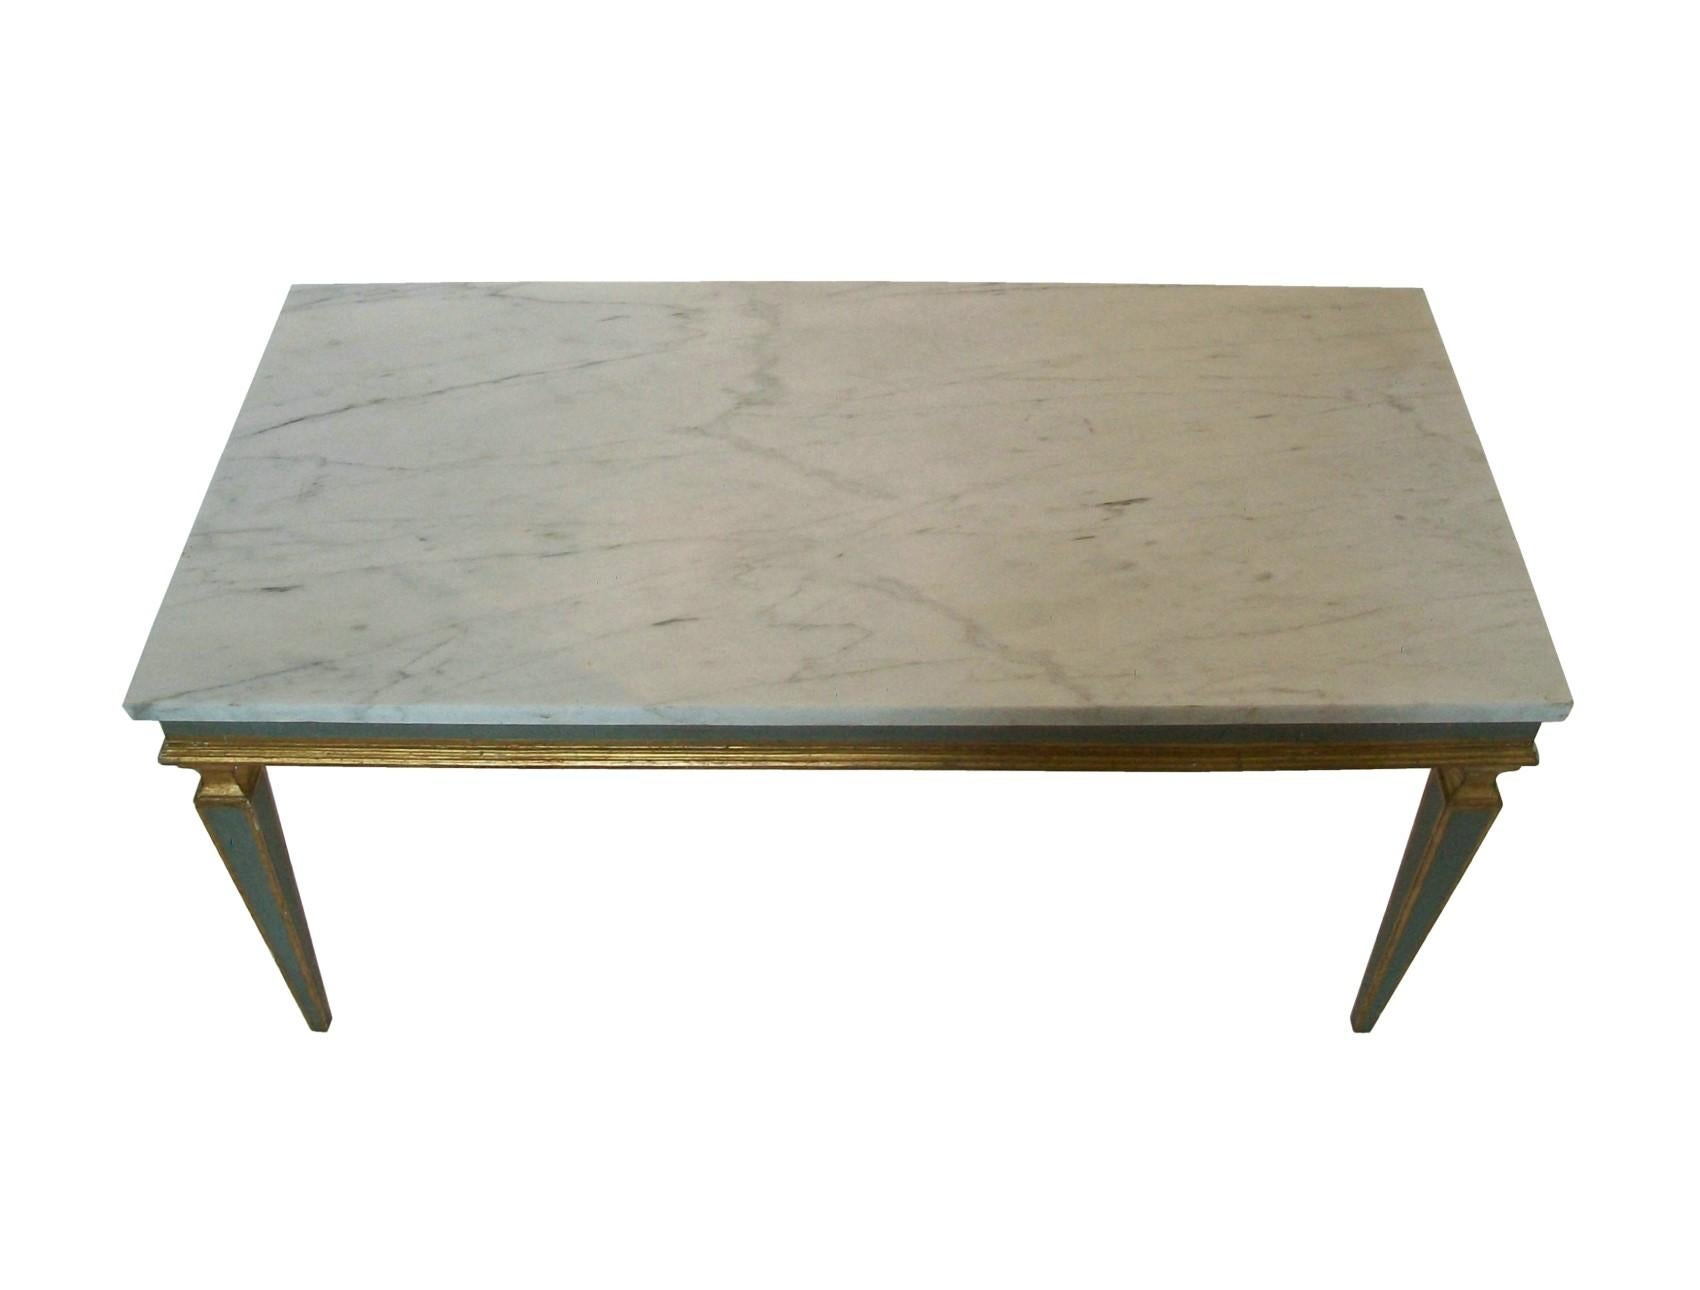 Neoclassical Revival Venetian Gray Painted & Parcel Gilt Coffee Table - Marble Top - Mid 20th Century For Sale